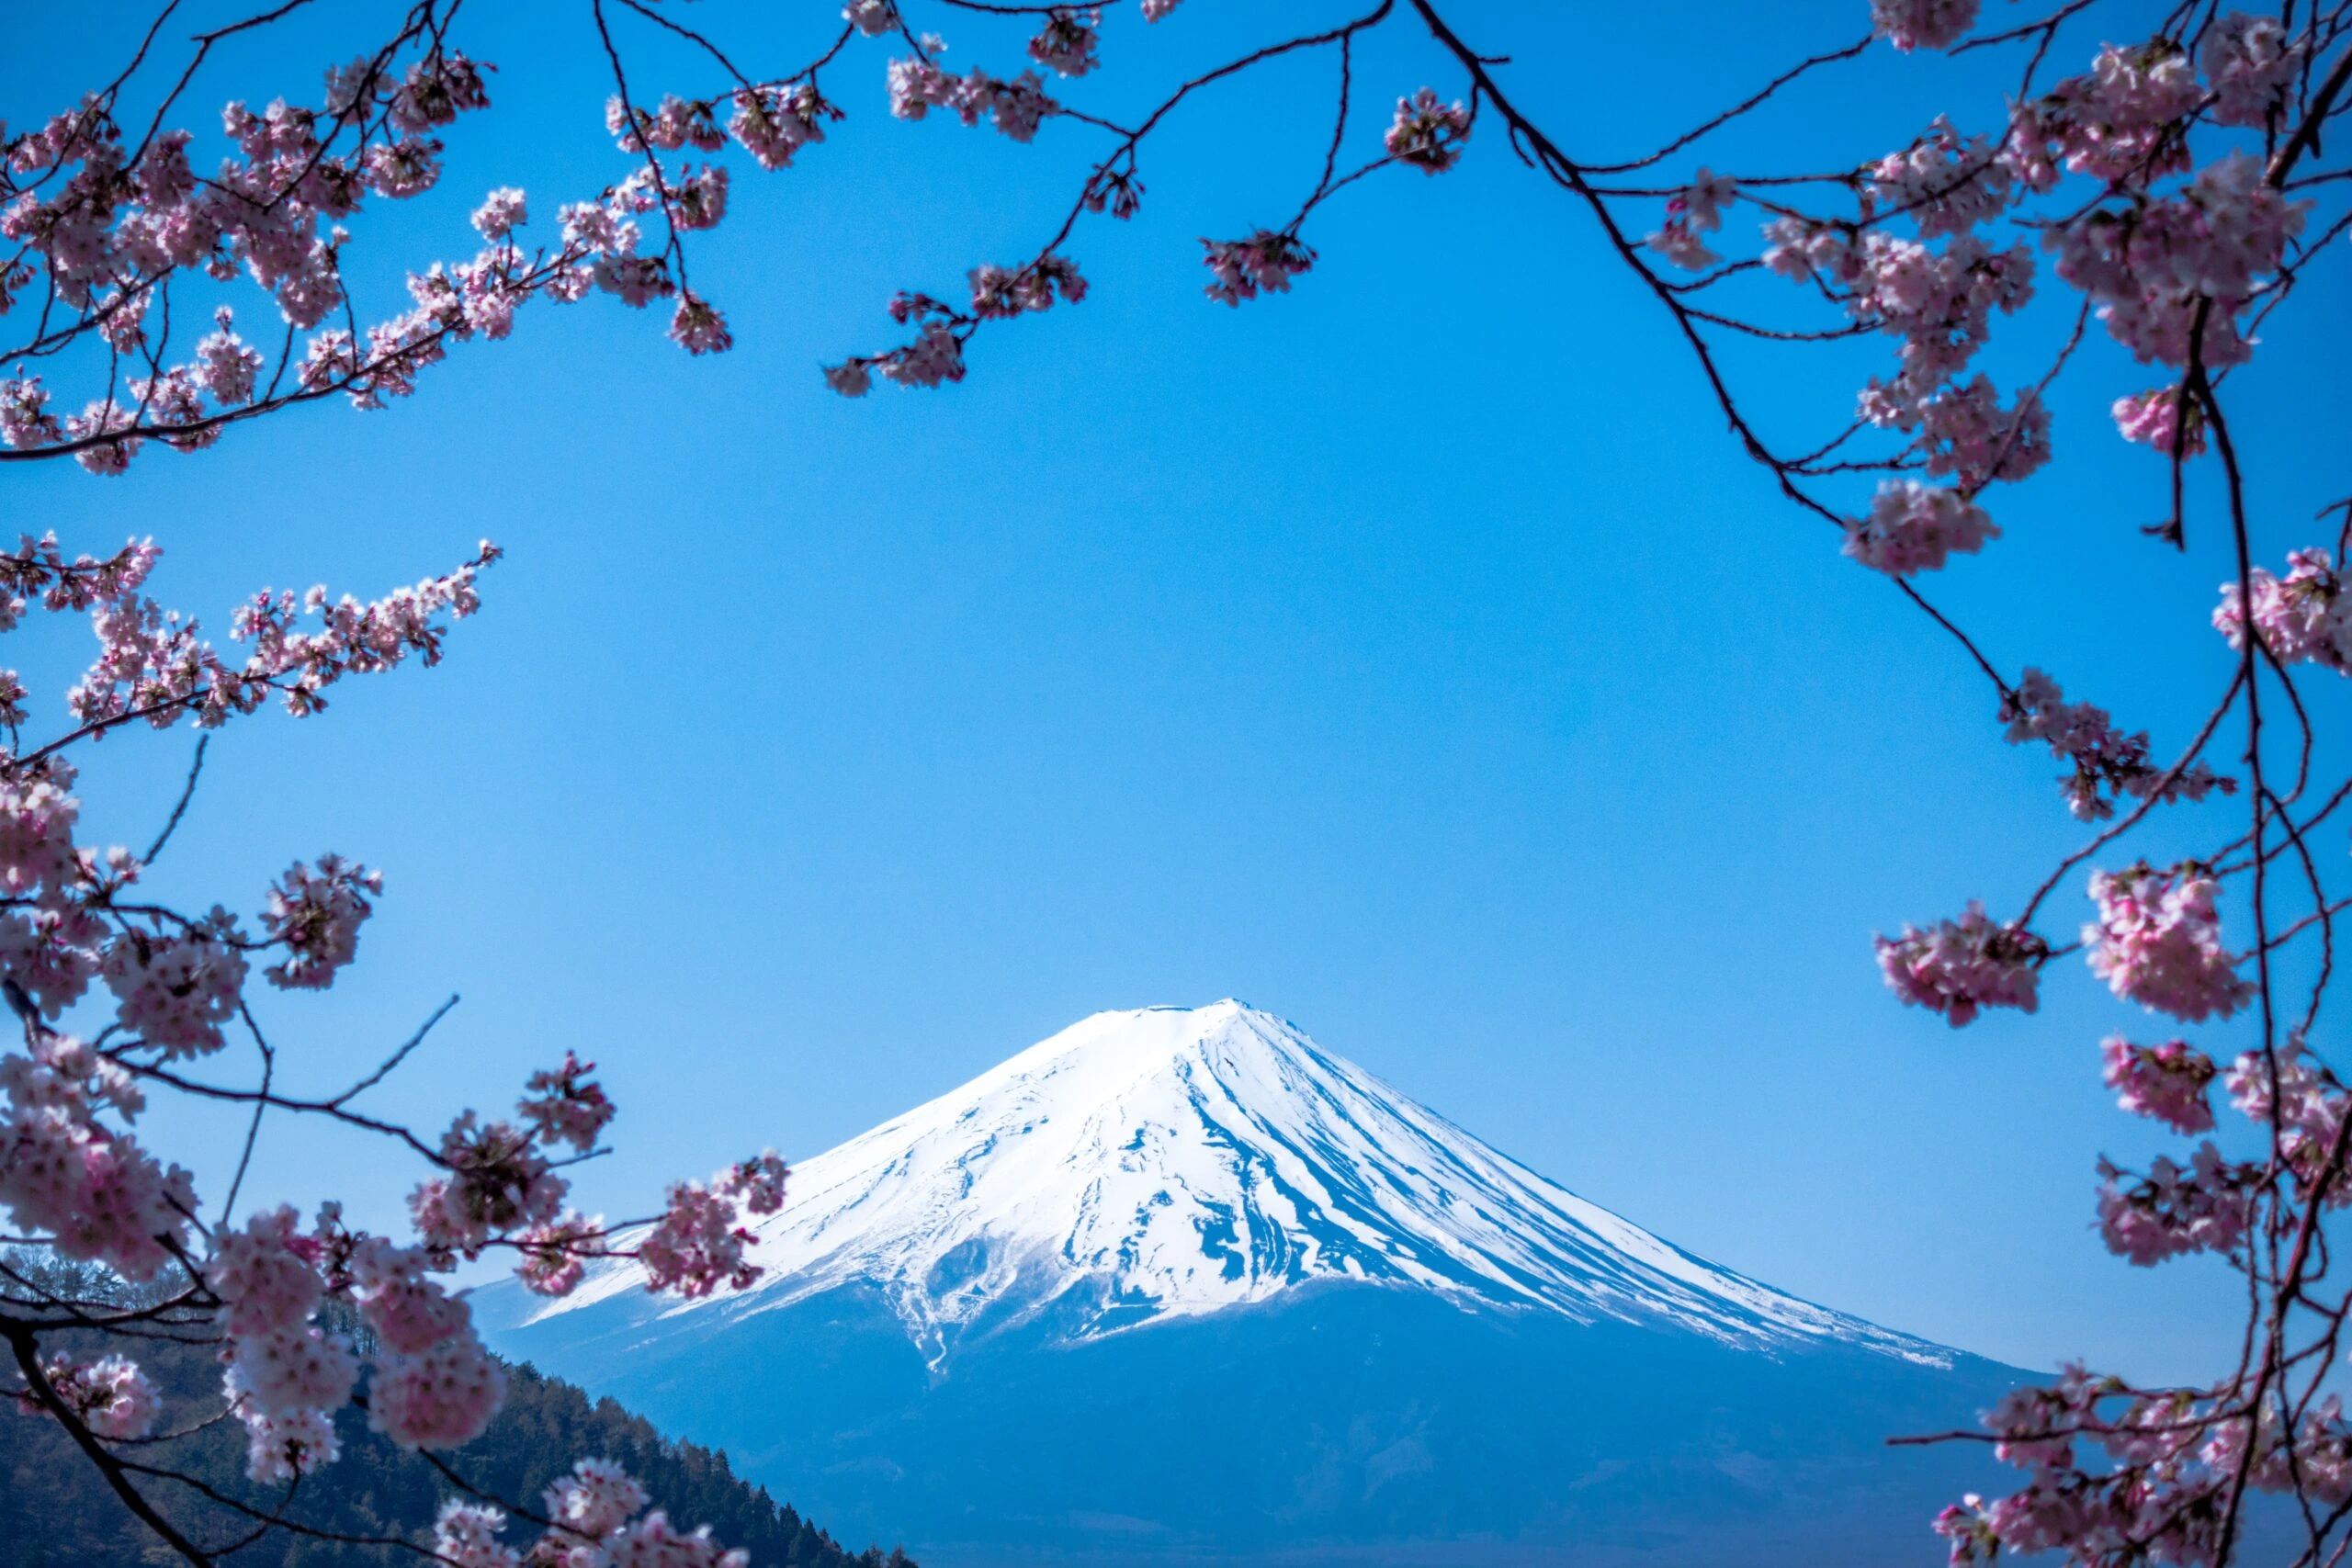 jj-ying-Mount Fuji in background cherry blossoms foreground blue sky -unsplash